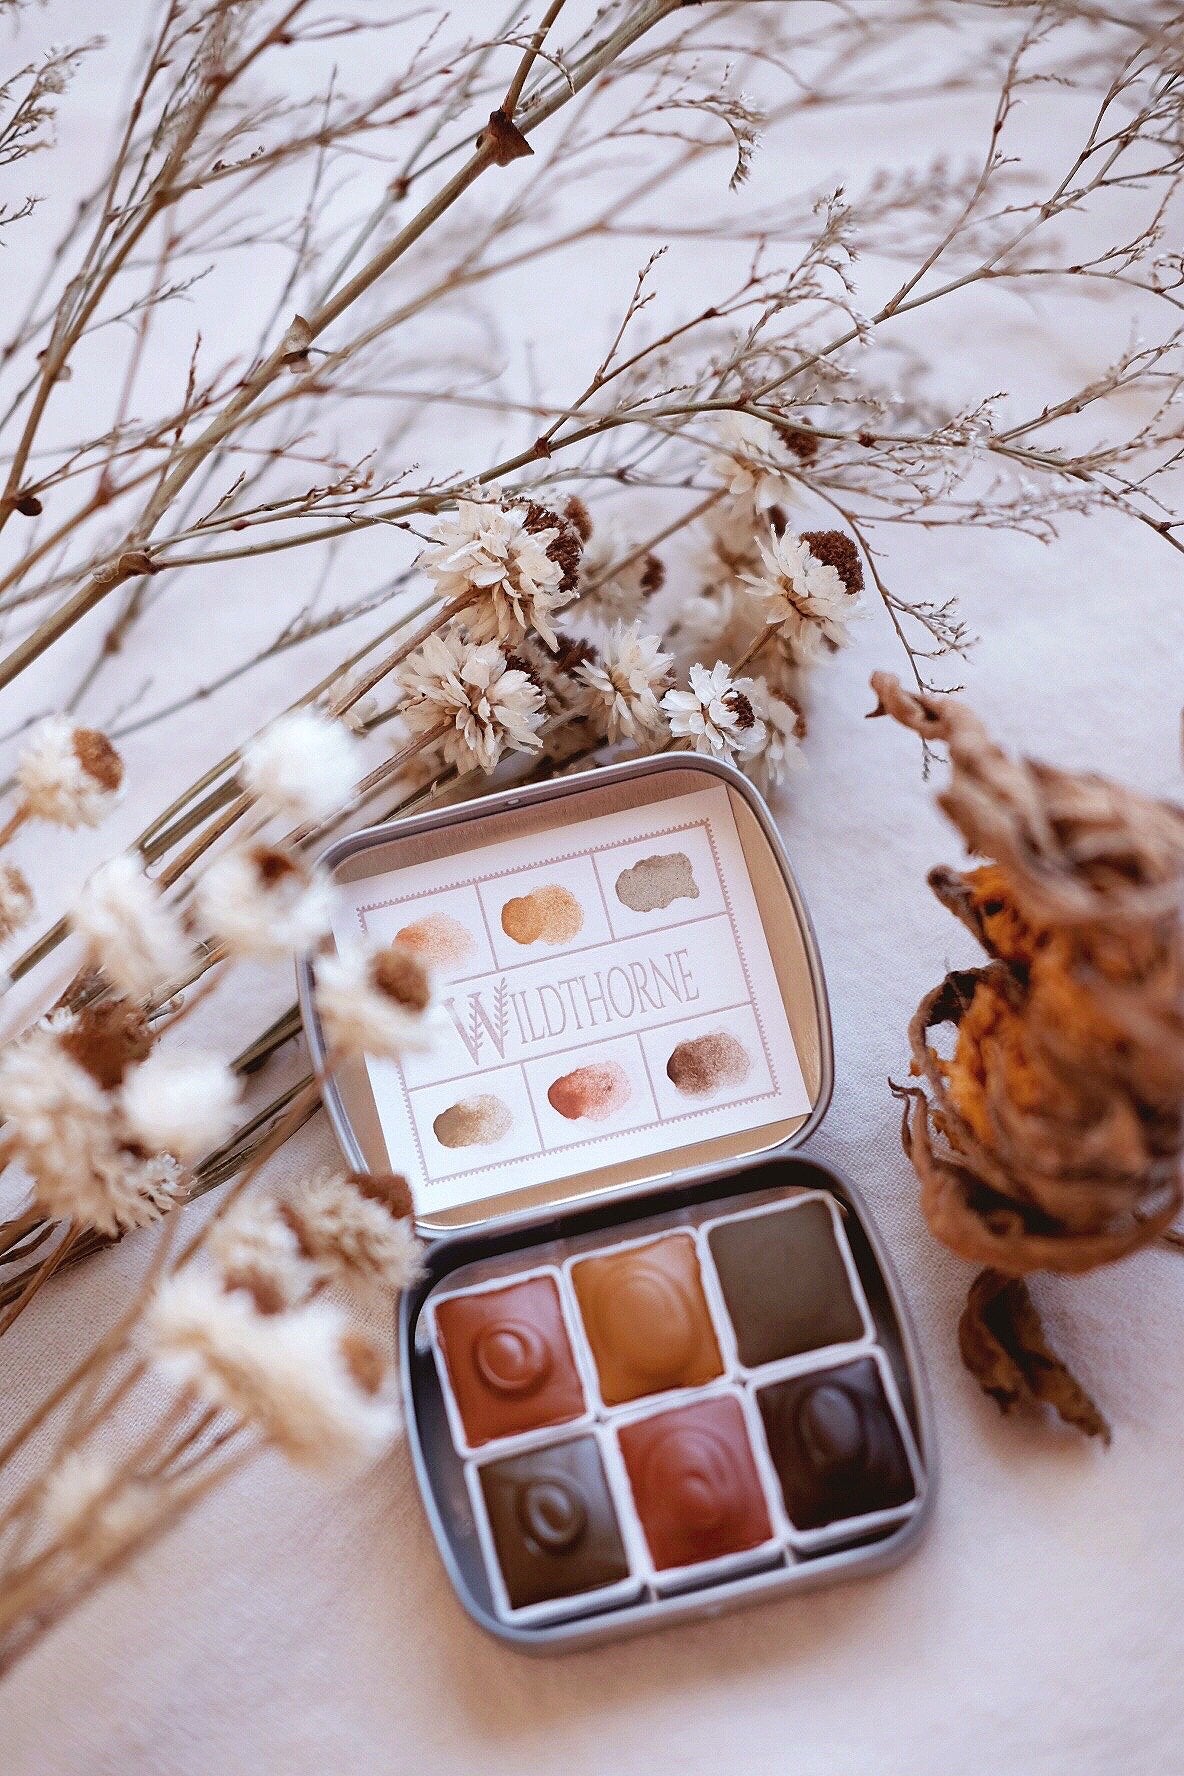 RESERVE for Nick - Chypre & Gathering of Leaves natural mineral watercolor palettes